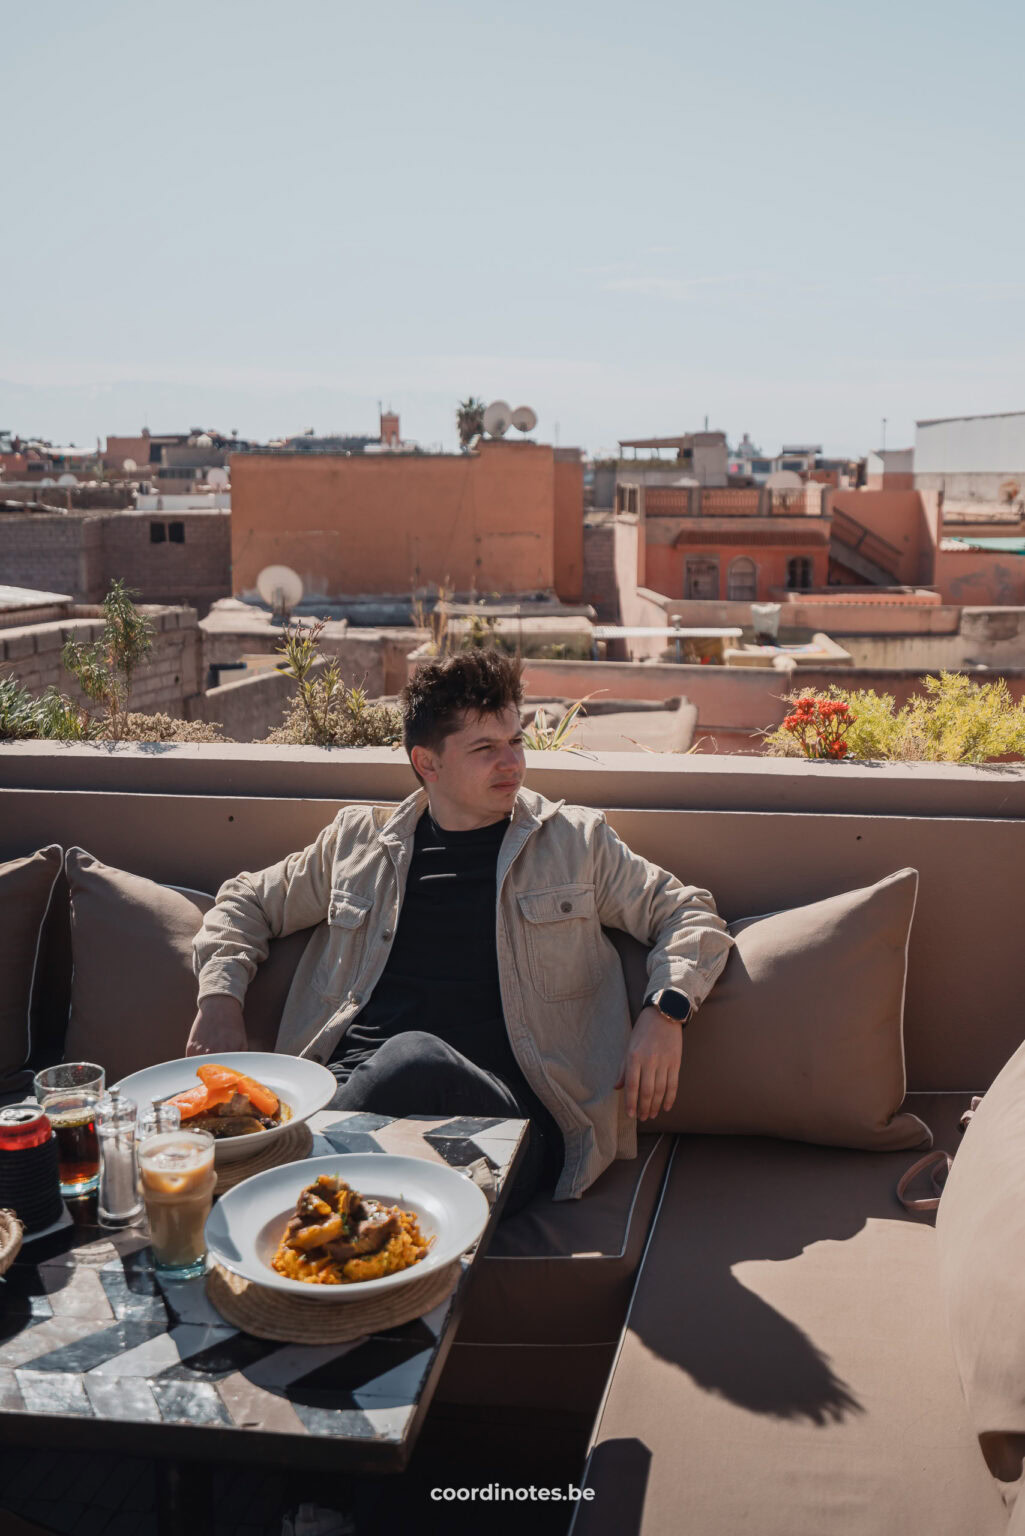 Having a meal on a rooftop